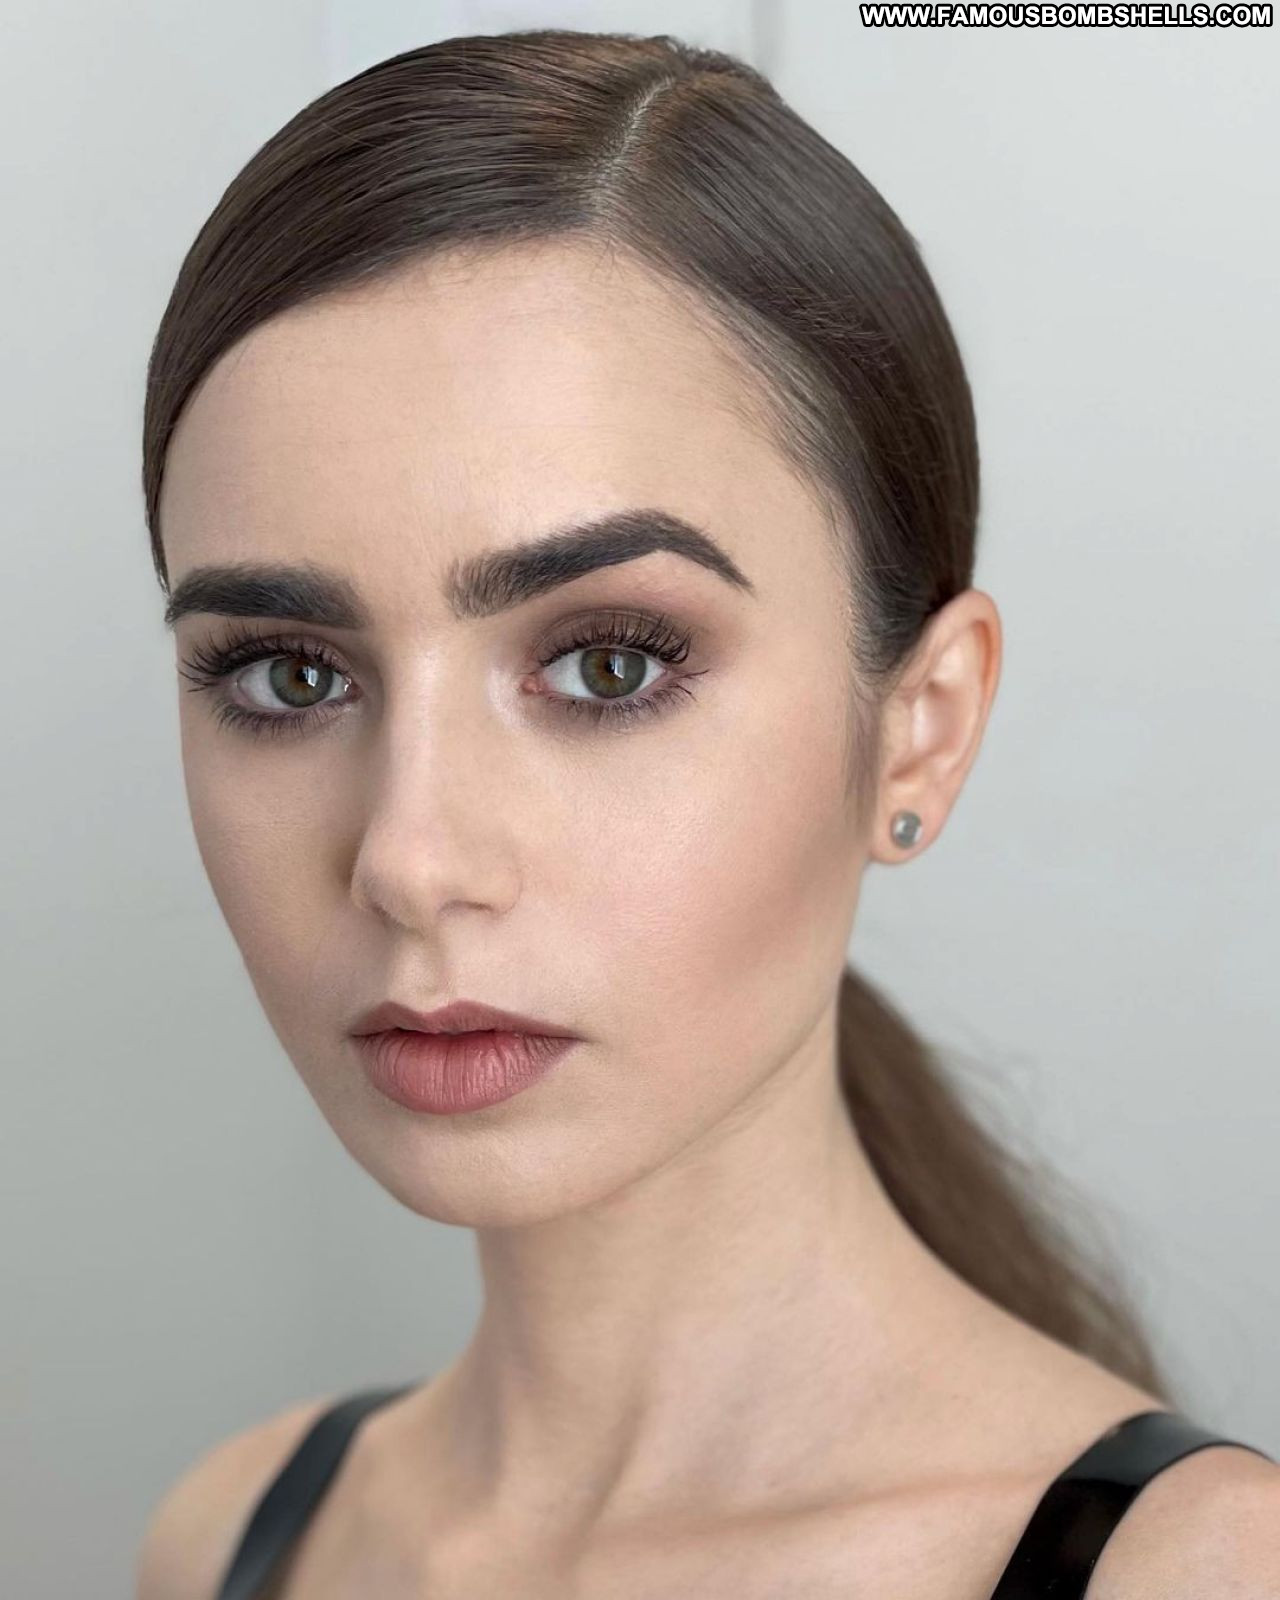 Lily collins sexy pictures